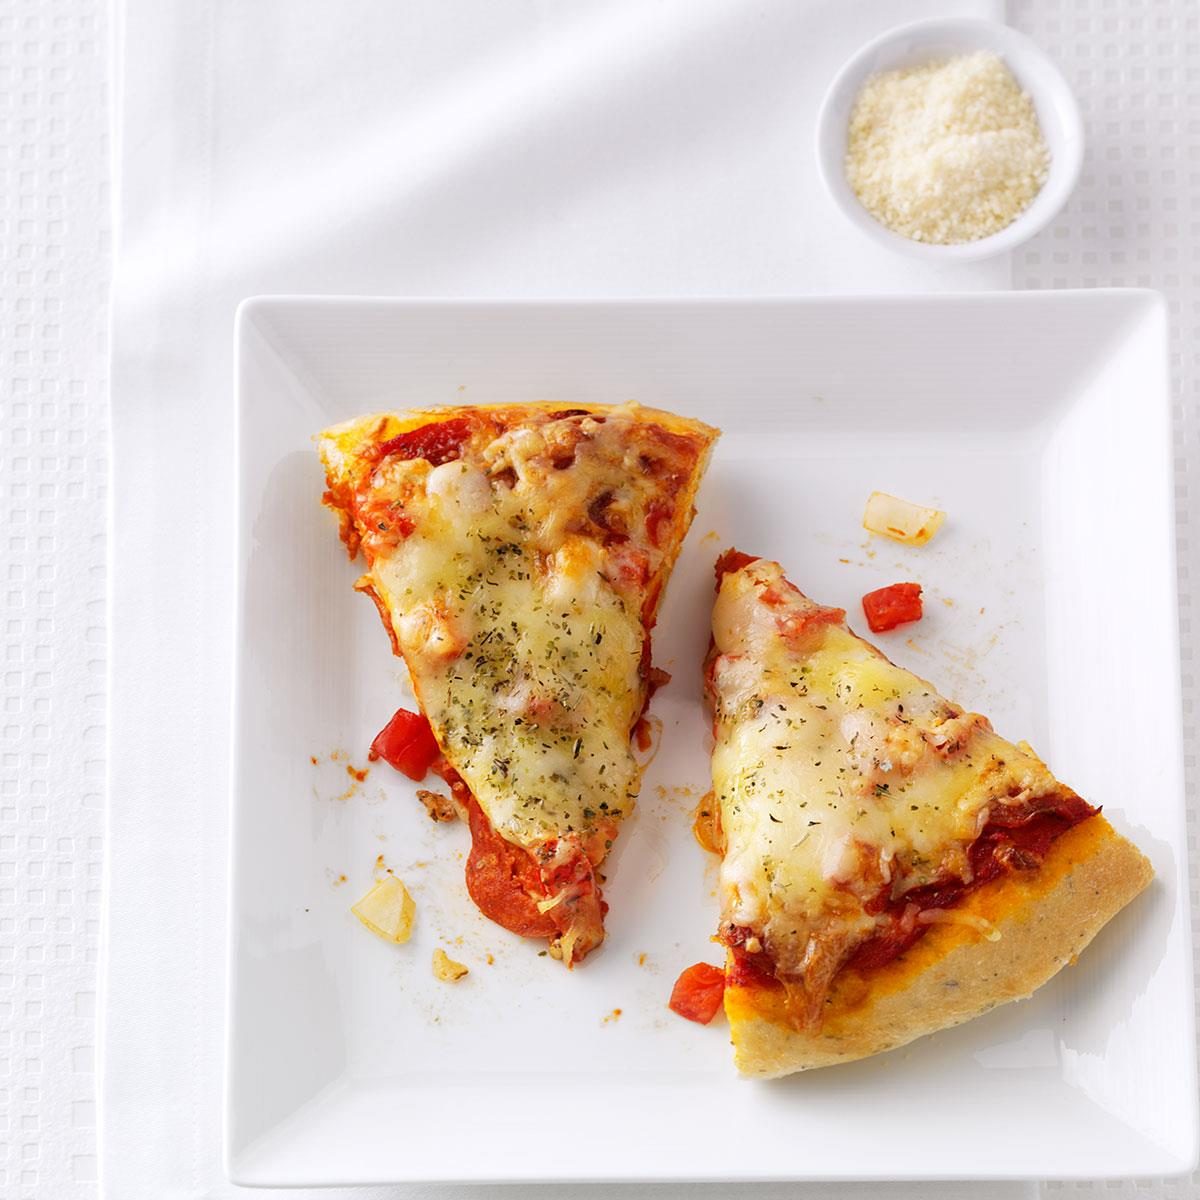 <p><span>Just as popular as a sausage, </span><a href="https://www.tasteofhome.com/recipes/pepperoni-pizza/" rel="noopener"><span><span>pepperoni pizza</span></span></a><span> is a go-to for many (and slightly easier to prepare). Go the simple route of purchasing a package of pre-sliced pepperoni and spread it evenly across your pizza. If you want to fancy things up, drizzle on some </span><a href="https://www.walmart.com/ip/Mike-s-Hot-Honey-Honey-with-a-Kick-Sweetness-Heat-100-Pure-Honey-Shelf-Stable-Gluten-Free-Paleo-12-oz-Bottle/119583978" rel="noopener"><span><span>hot honey</span></span></a><span> to bring out the spices of the meat.</span></p>